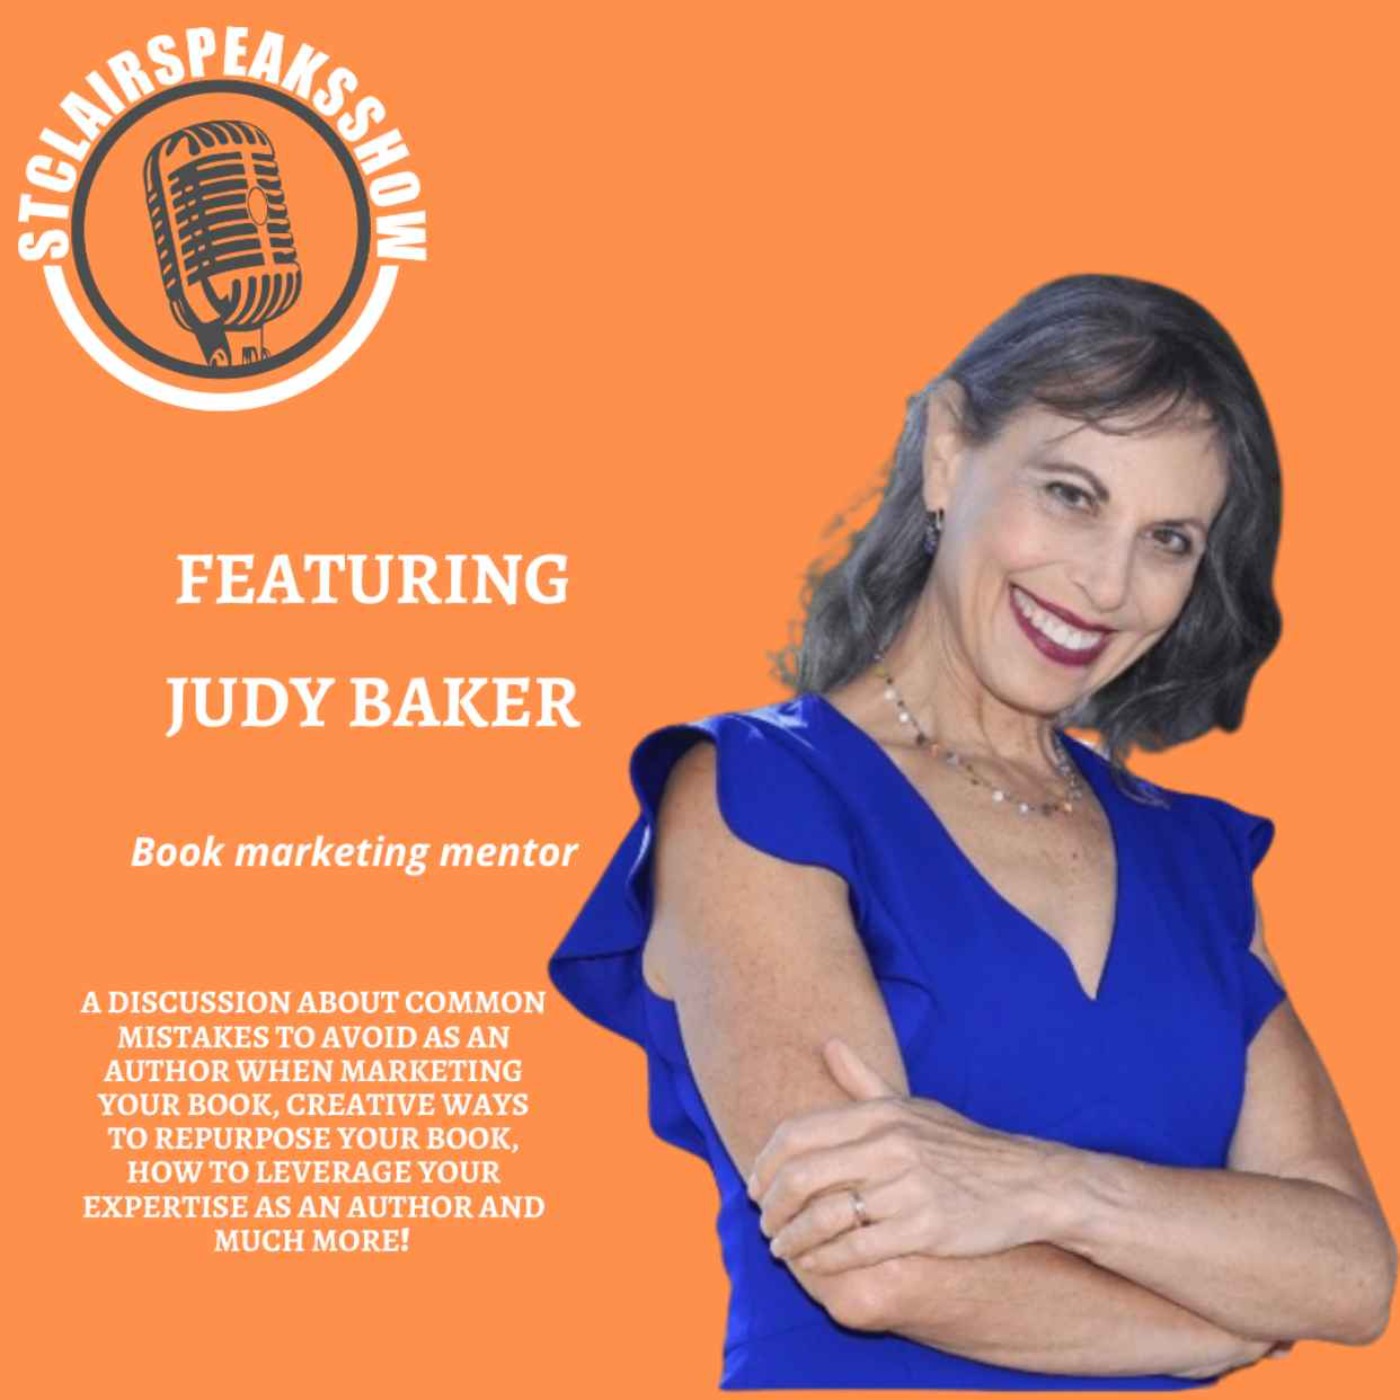 The StclairclairSpeaksShow featuring Judy Baker Book Marketing Mentor Image